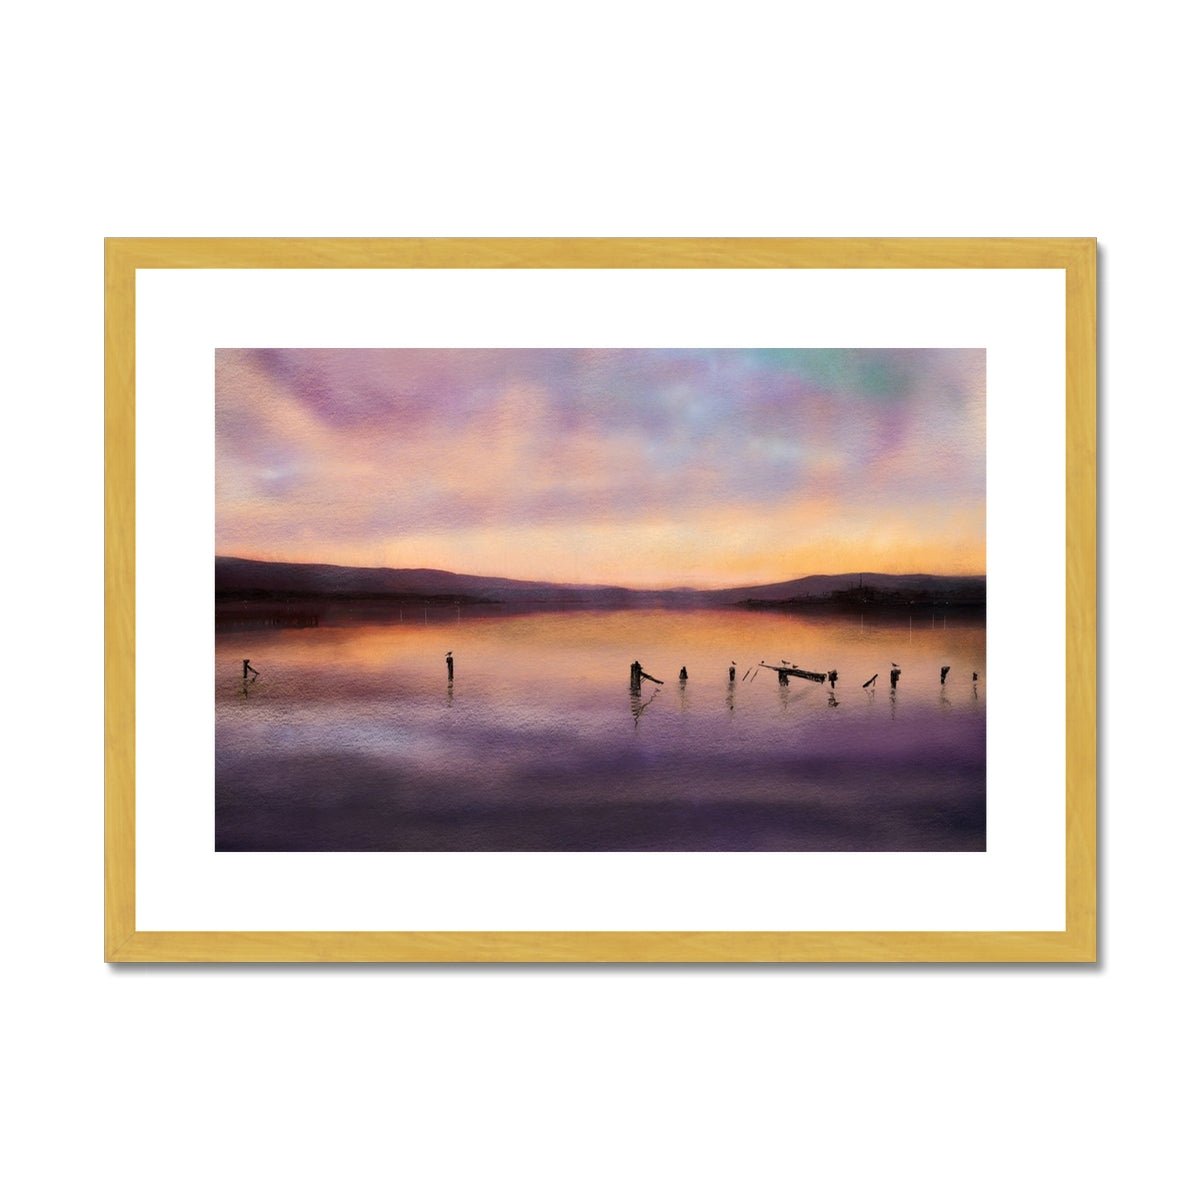 Admiralty Jetty Dusk Painting | Antique Framed & Mounted Prints From Scotland-Antique Framed & Mounted Prints-River Clyde Art Gallery-A2 Landscape-Gold Frame-Paintings, Prints, Homeware, Art Gifts From Scotland By Scottish Artist Kevin Hunter